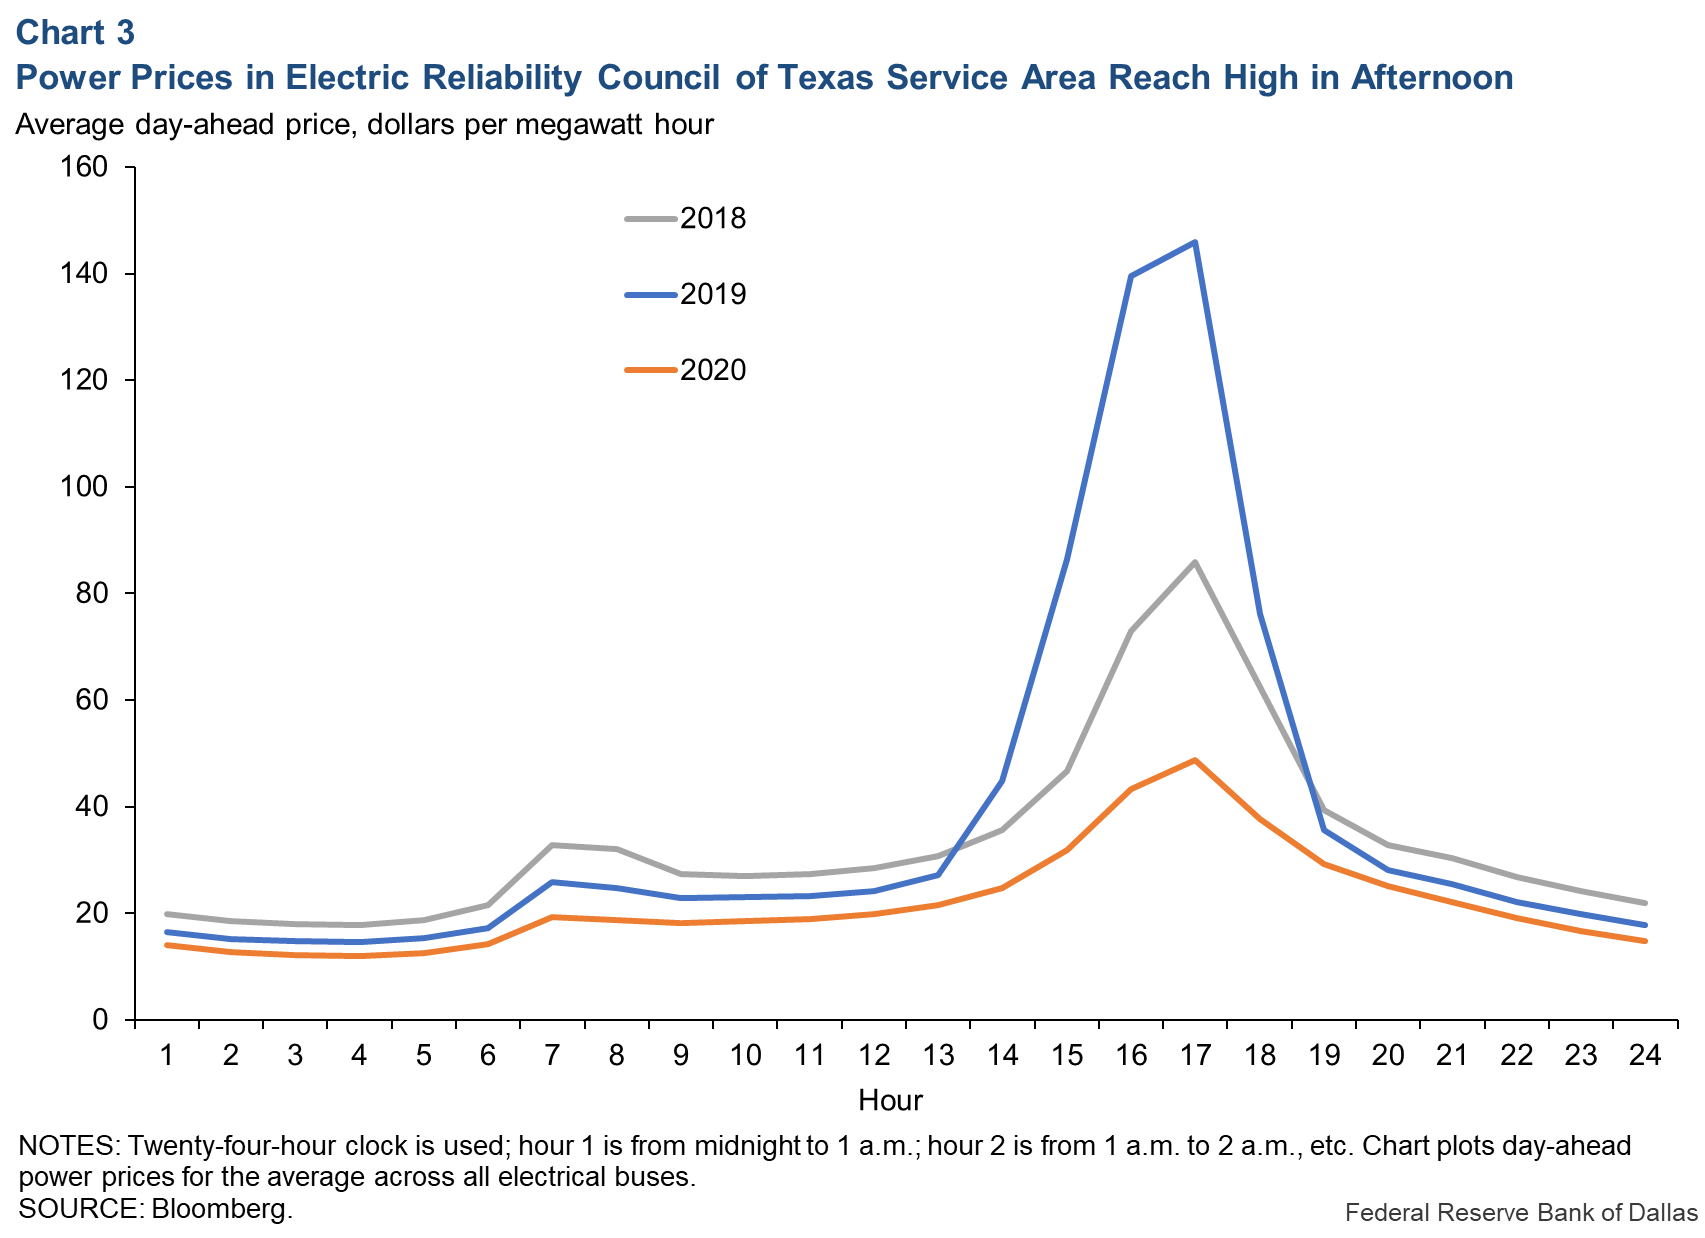 Chart 3: Power Prices in Electric Reliability Council of Texas Service Area Reach High in Afternooon